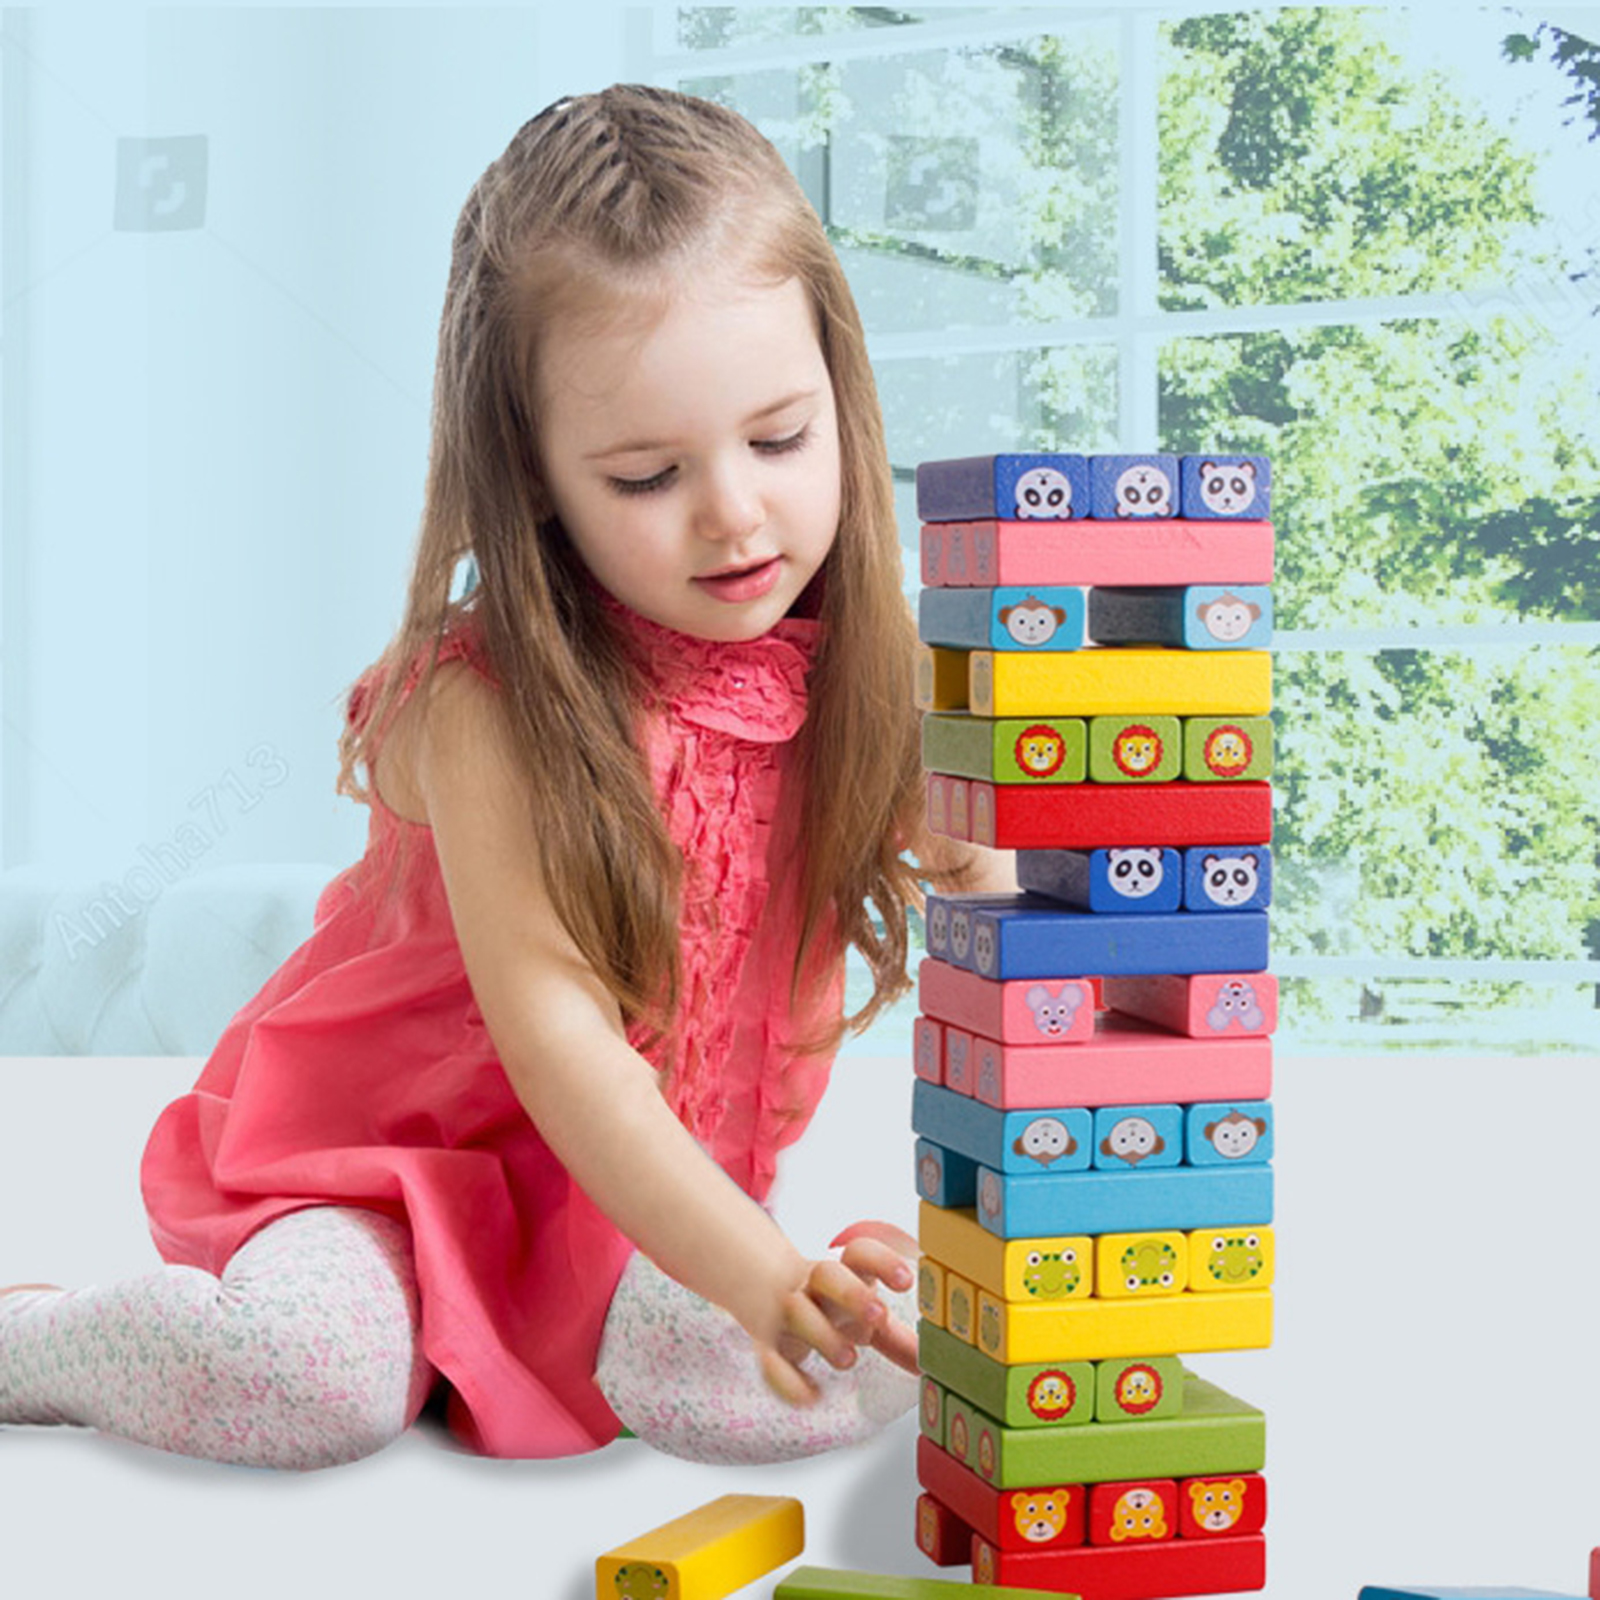 Funny Wooden Tower Hardwood Domino Stacking Building Blocks Toy Montessori Educational Game for Kids Children Gift